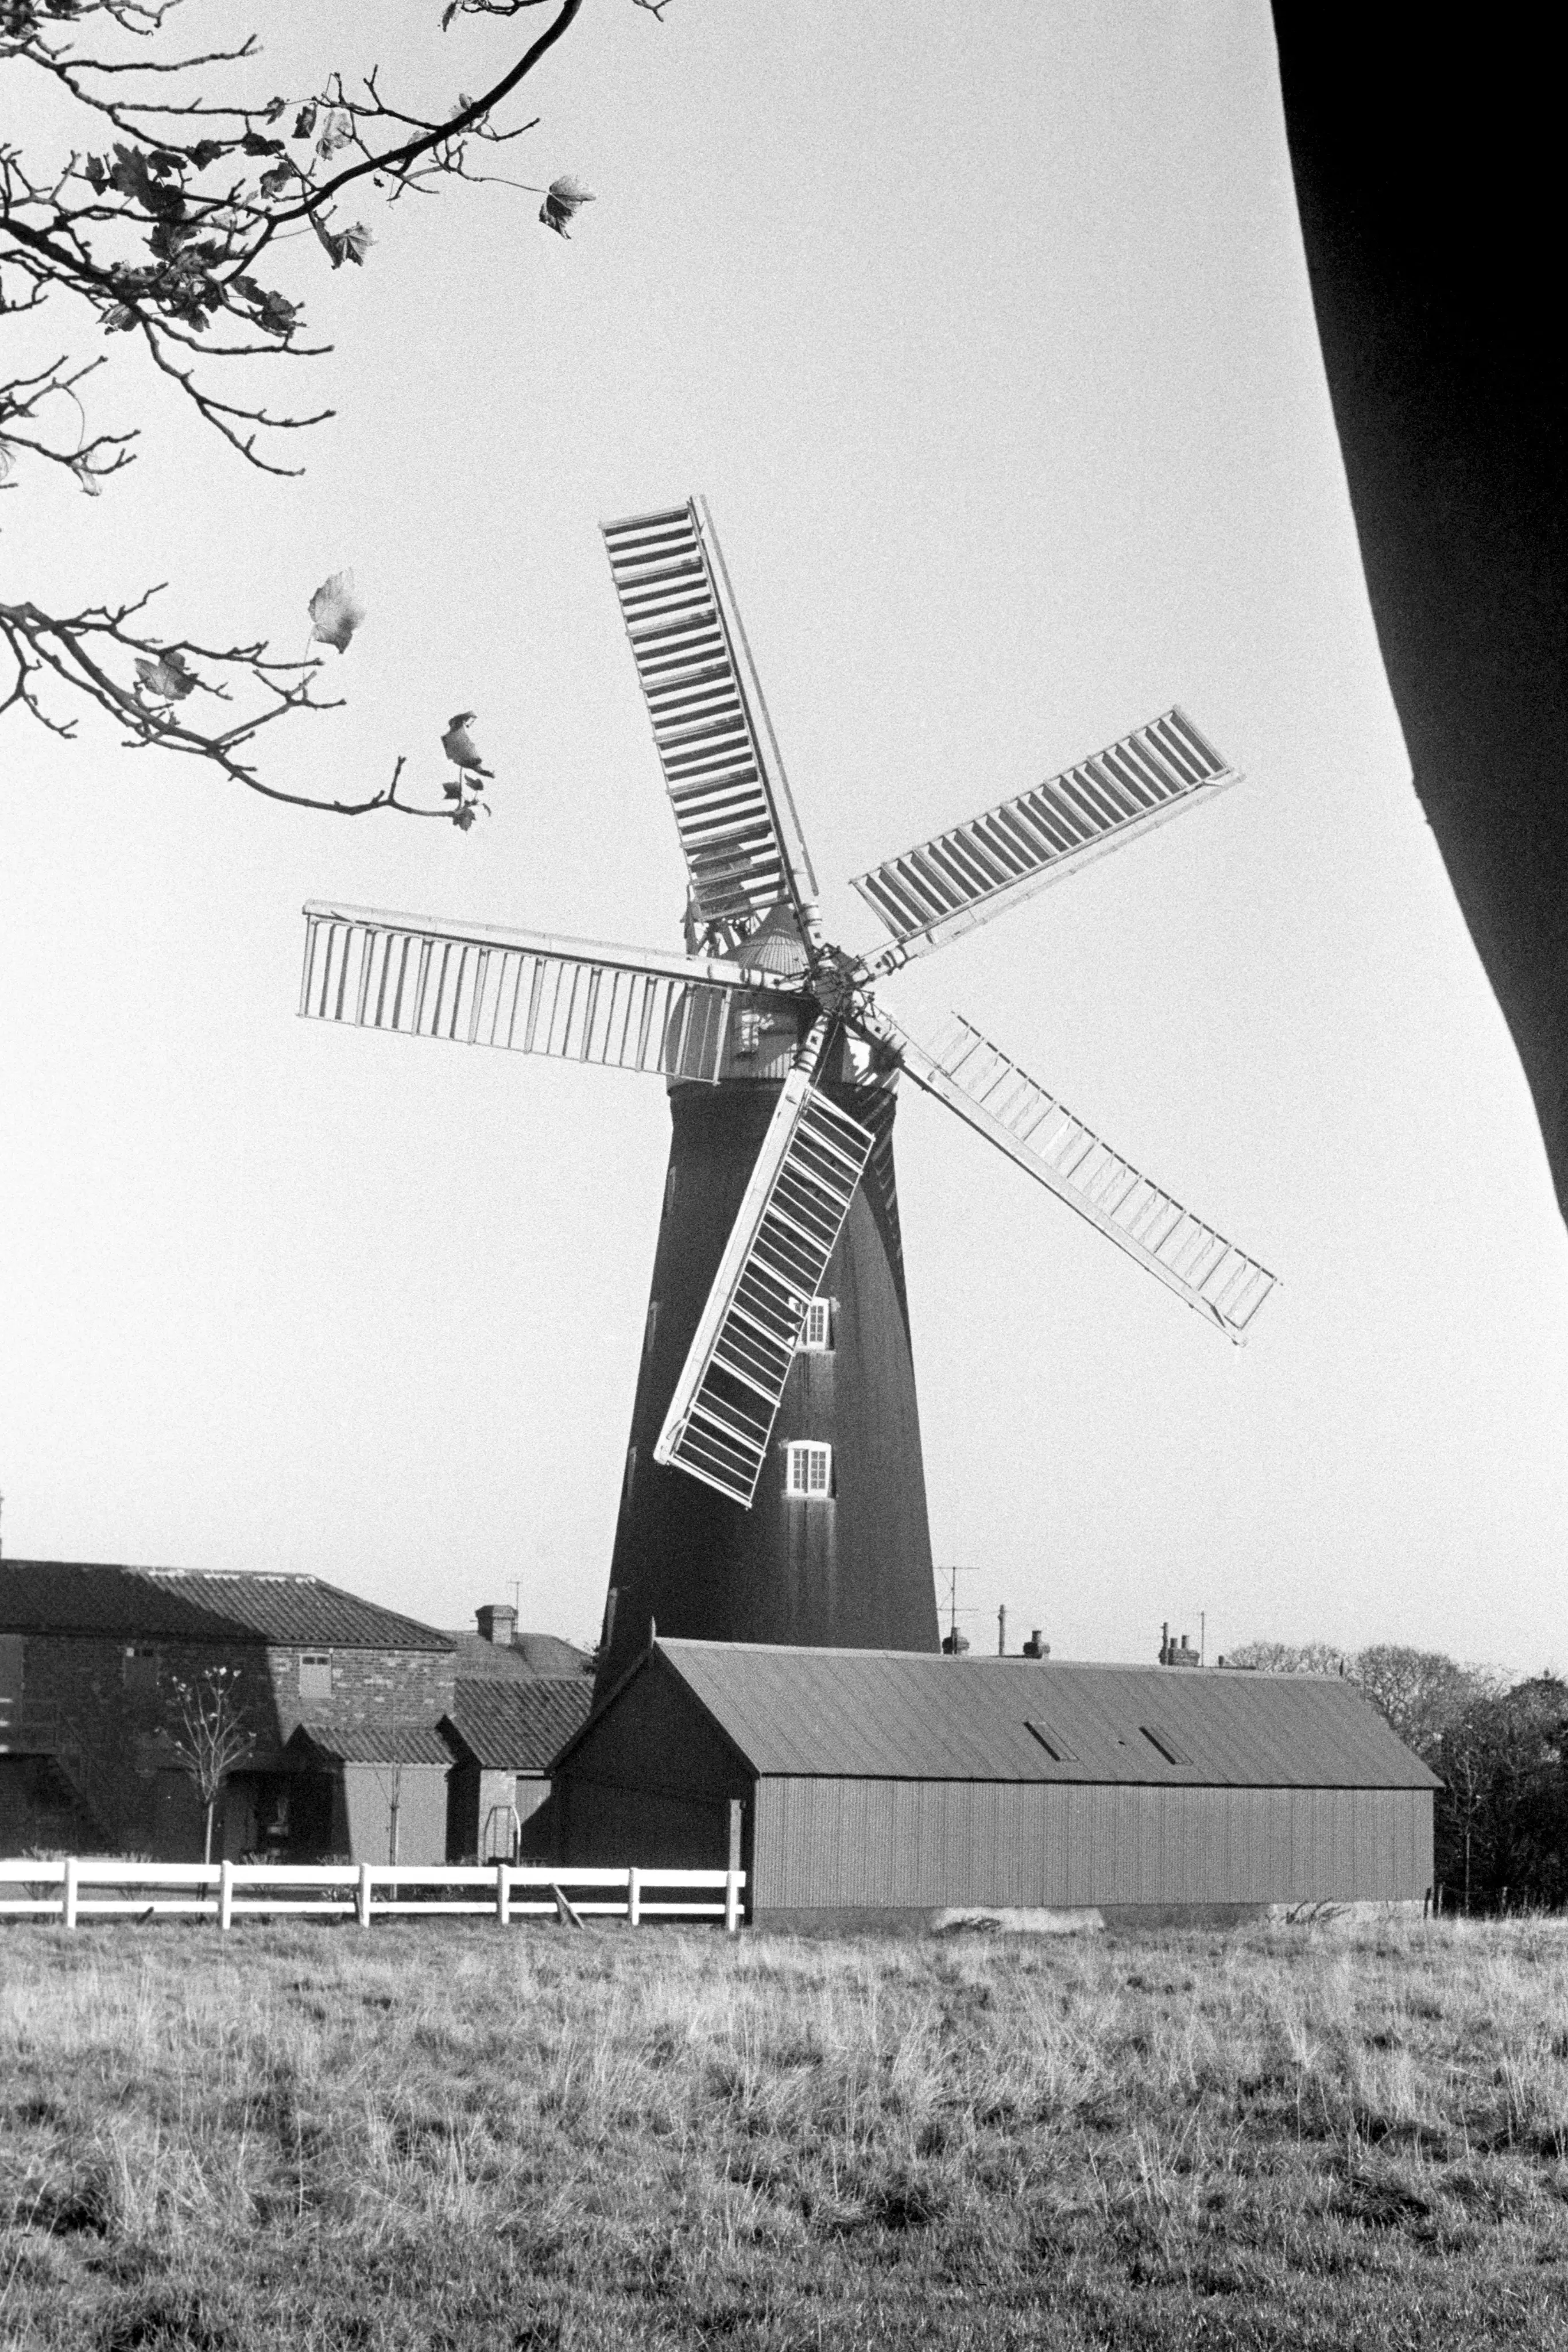 The Burgh Le Marsh windmill in 1970.